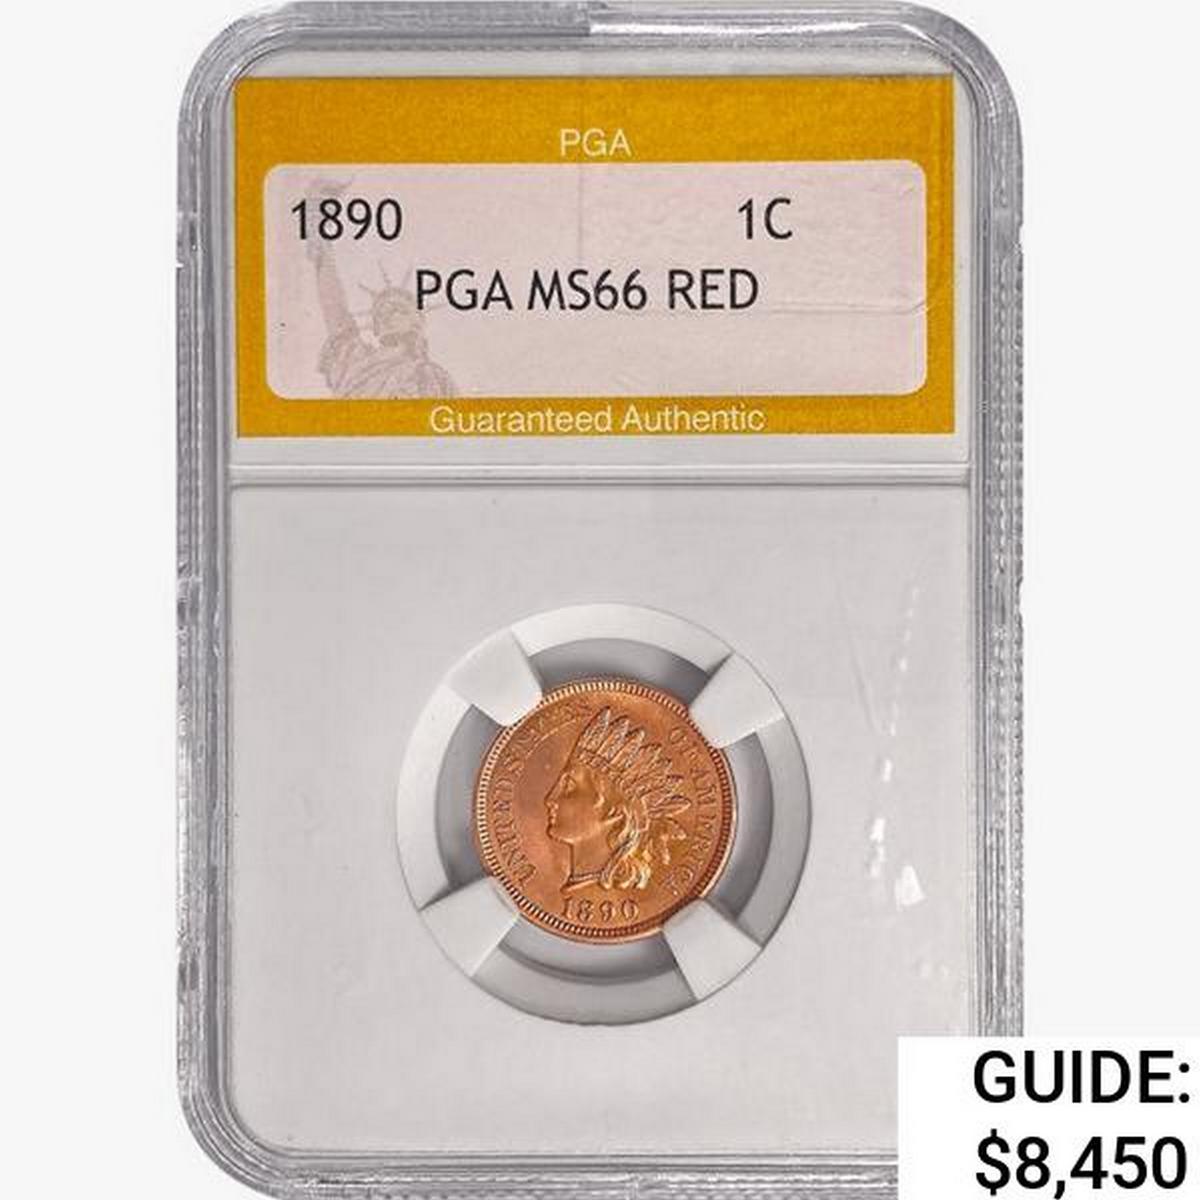 1890 Indian Head Cent PGA MS66 RED